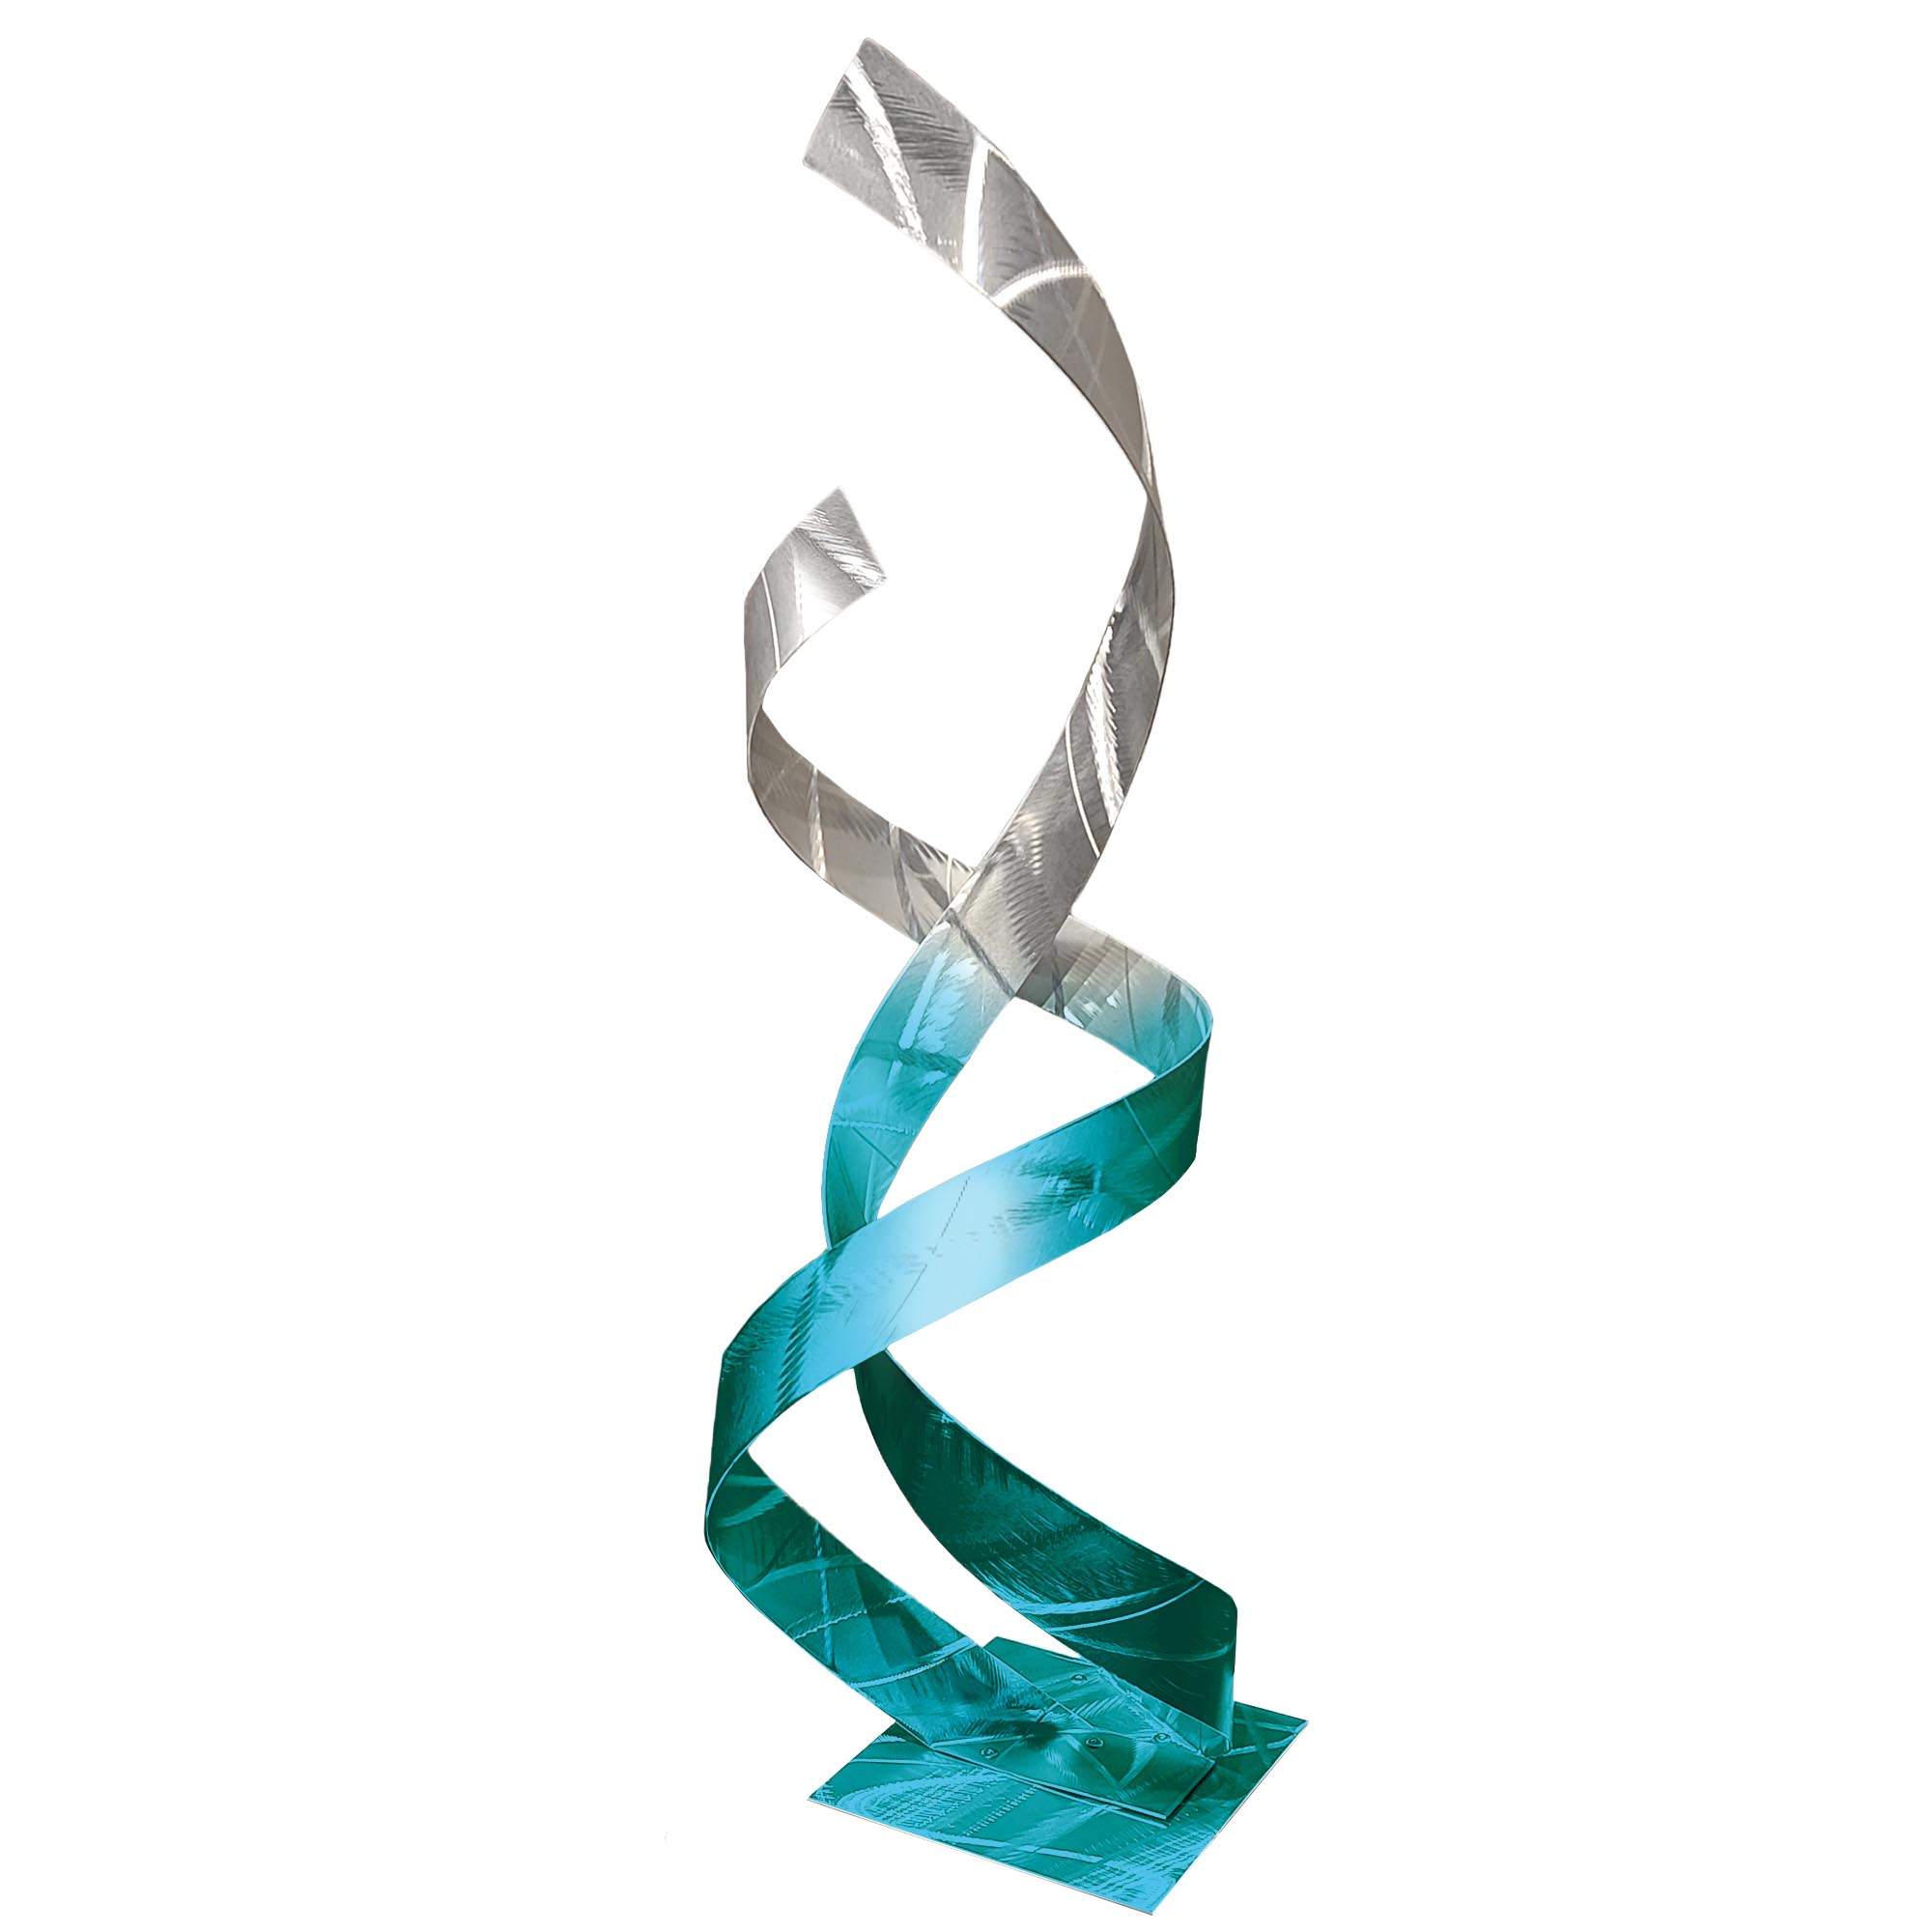 Two Lovers Teal Fade by Carlos Jacobs - Metal Sculpture, Modern Decor (10x33in.) - Image 2